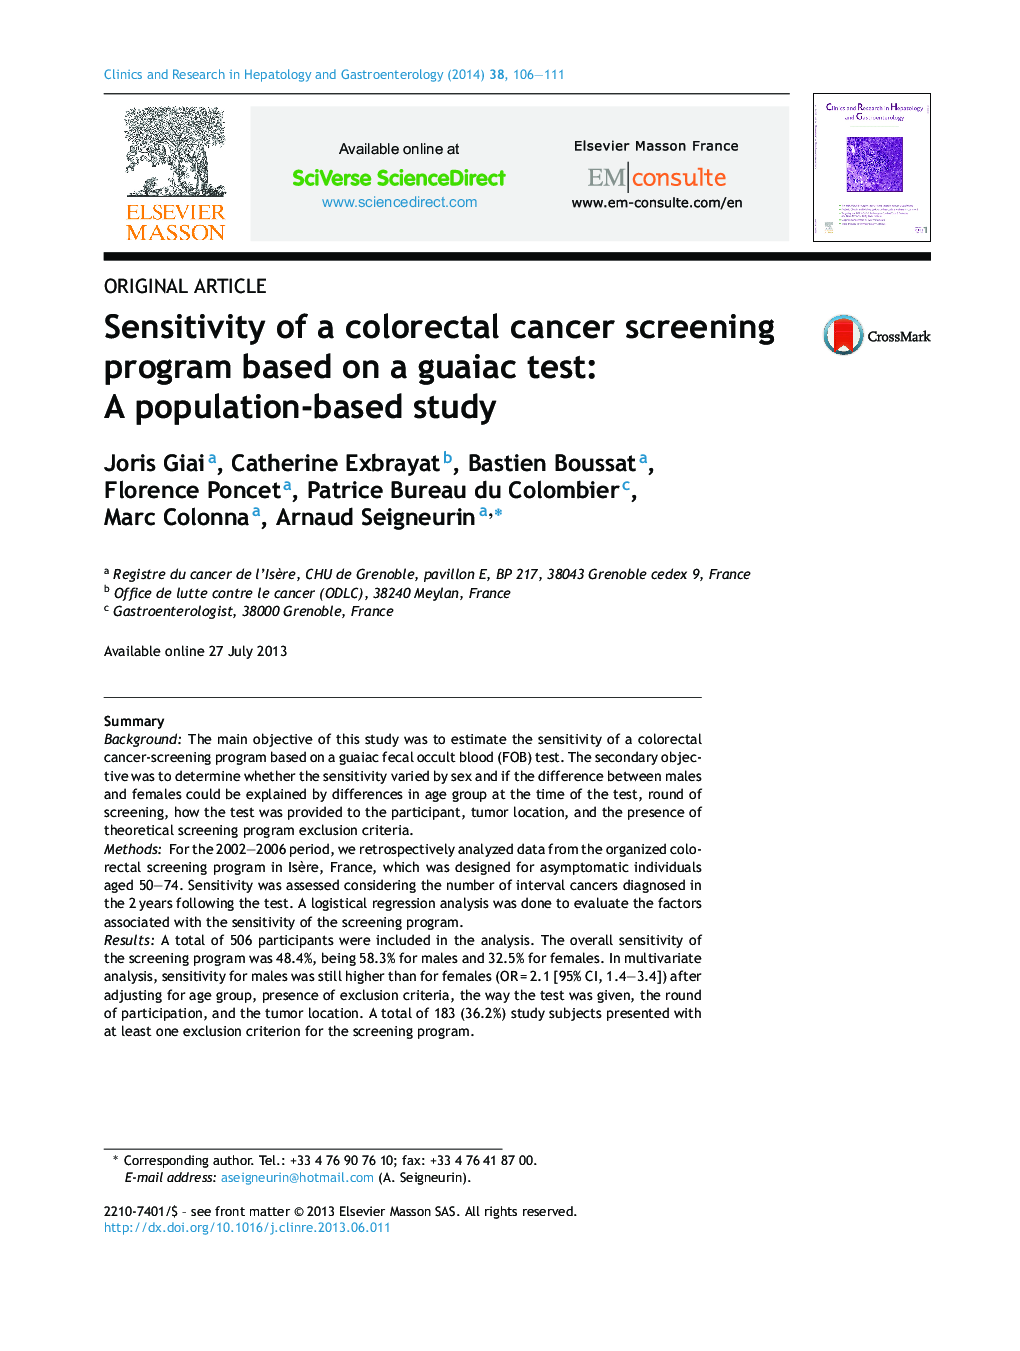 Sensitivity of a colorectal cancer screening program based on a guaiac test: A population-based study